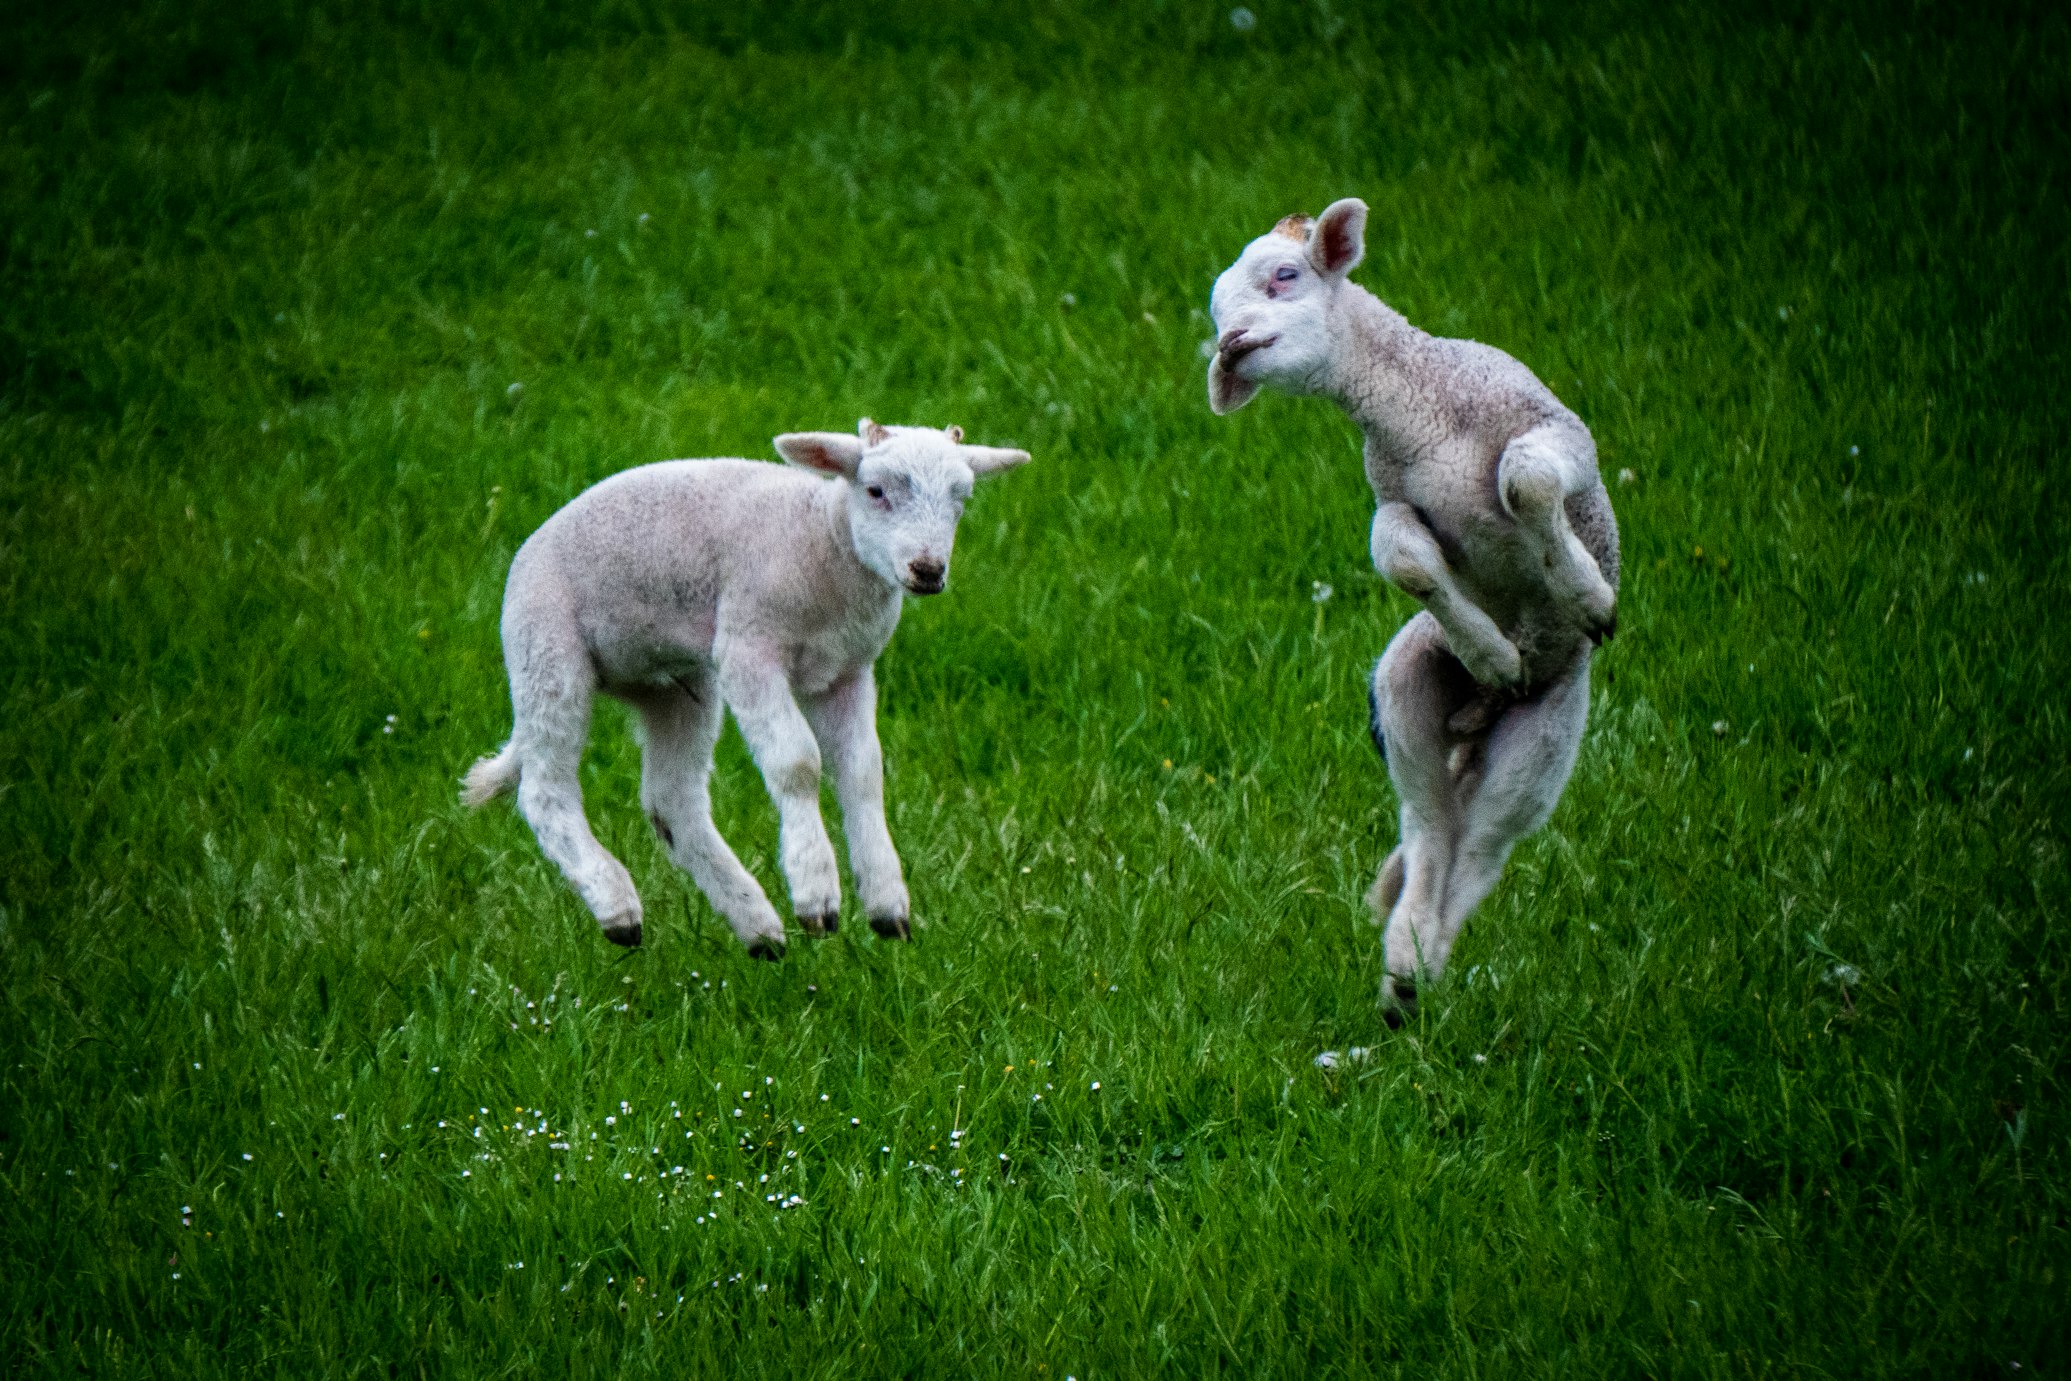 Two happy jumping lambs frolicking in a field